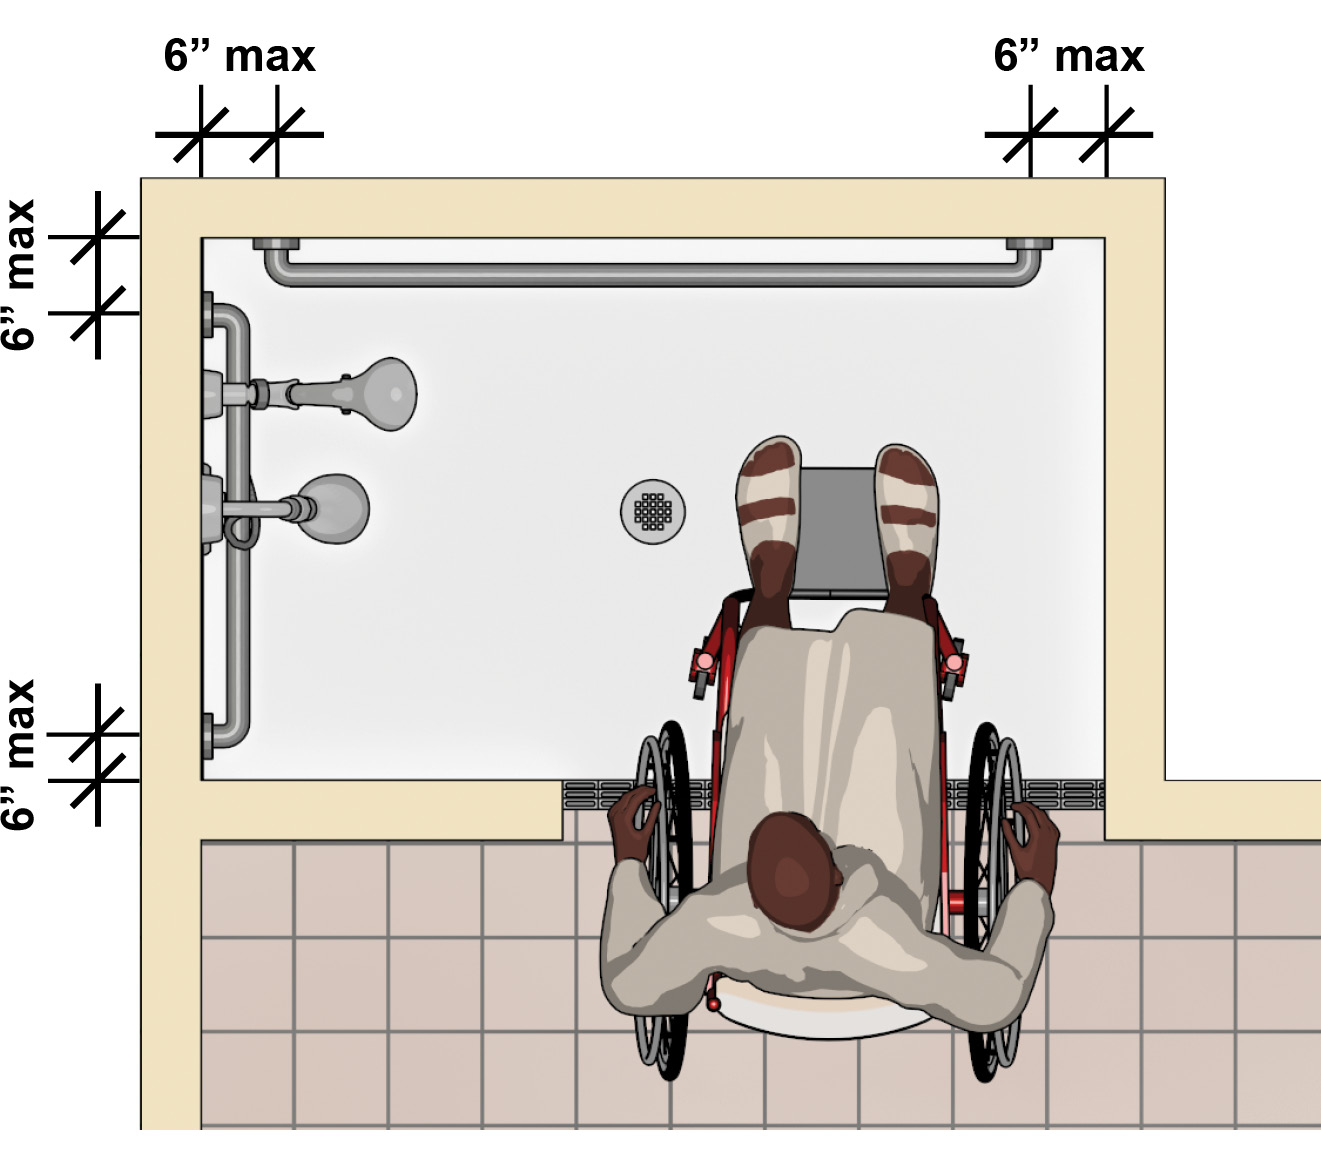 Person using wheelchair entering an alternate roll-in shower
compartment. The side wall farther from the opening and the back wall
have grab bars that extend 6" max. from adjacent
walls.